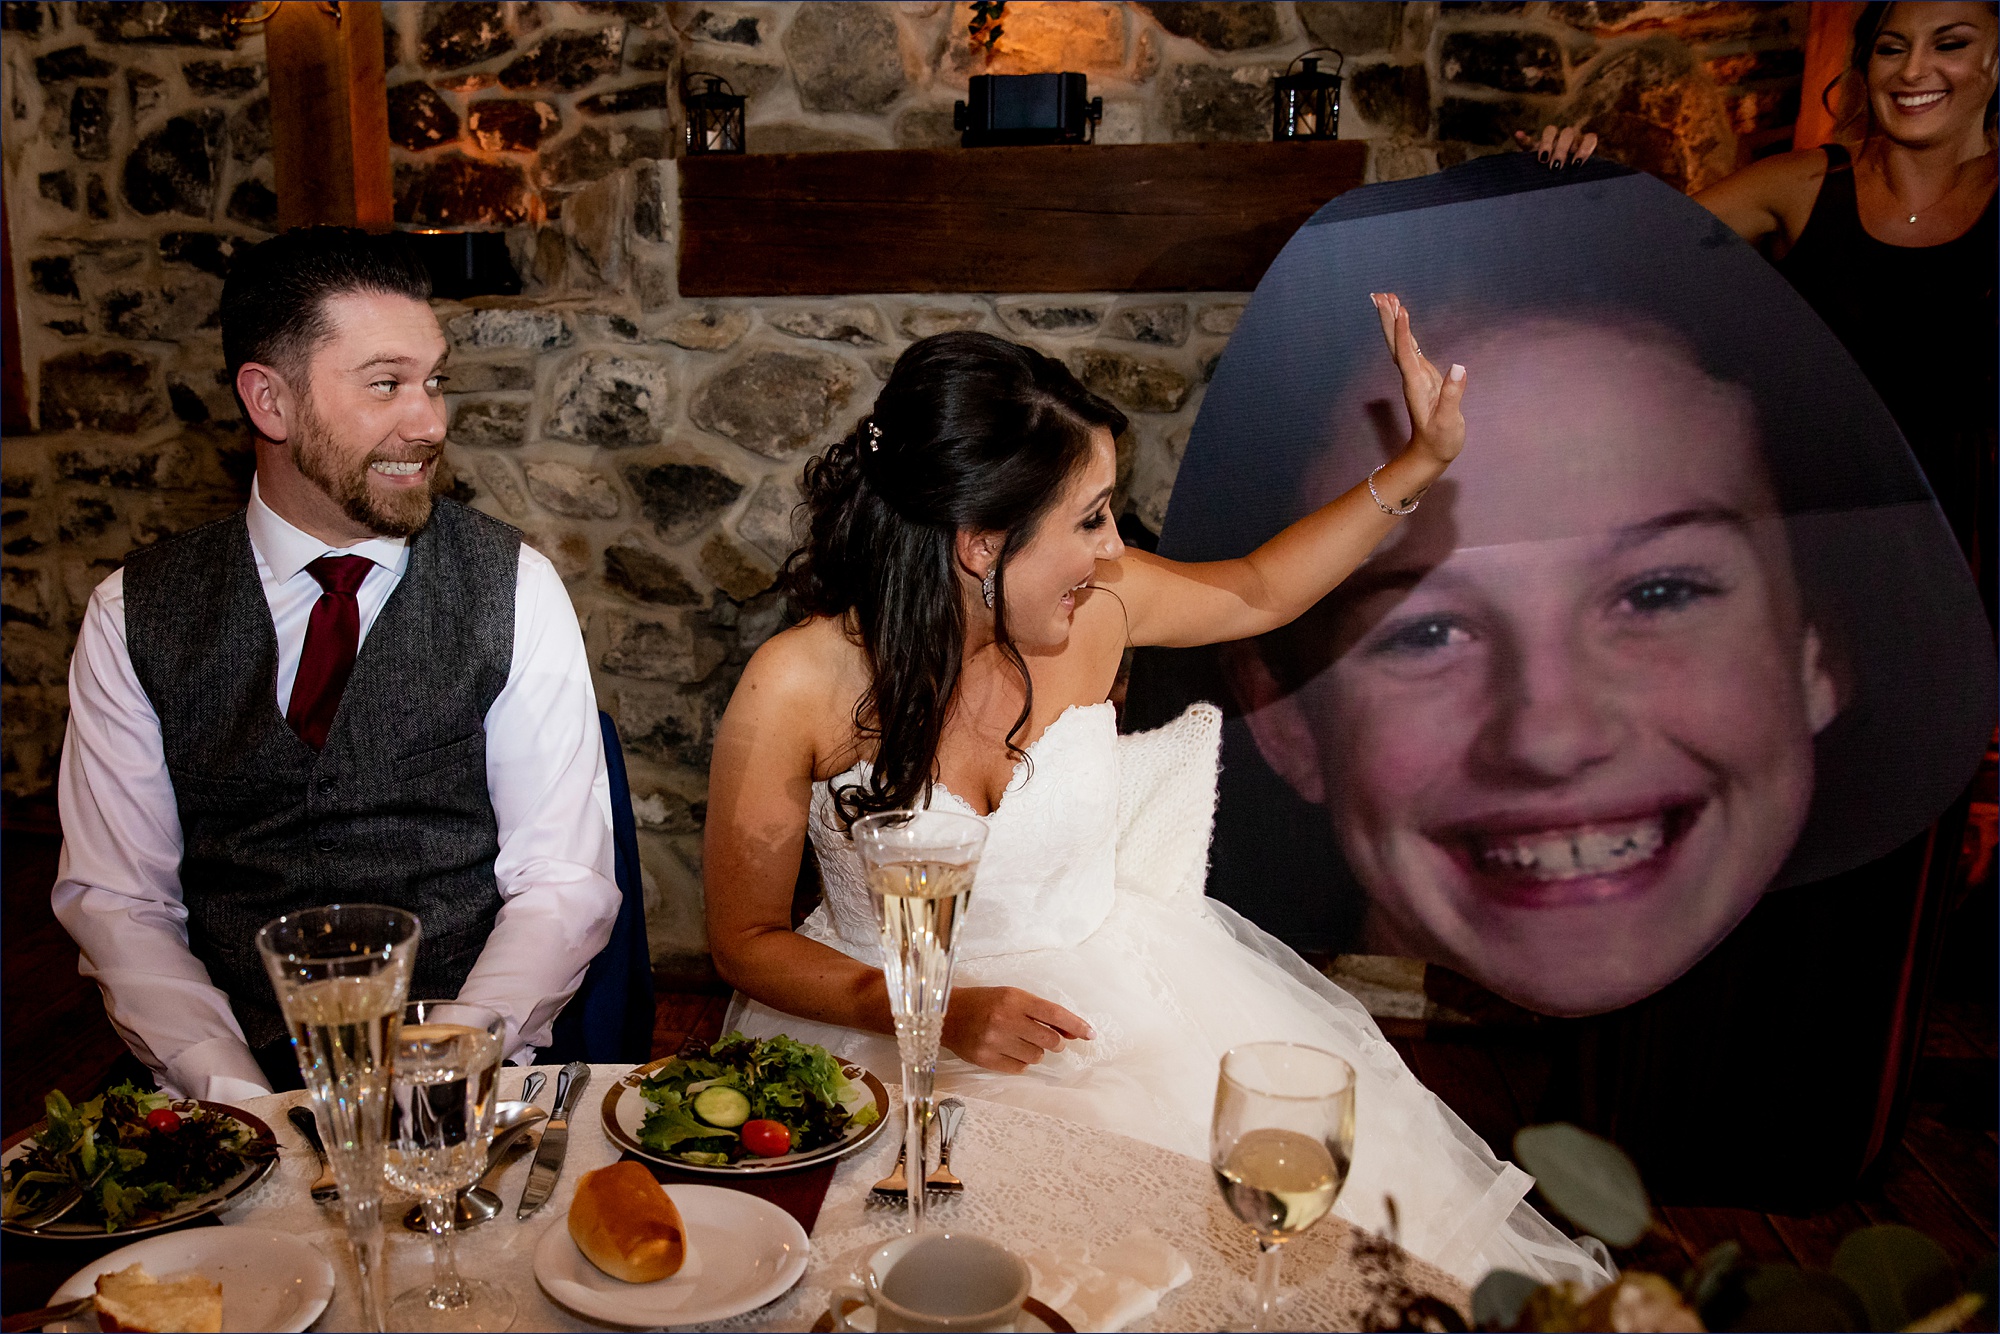 An embarrassing photo of the bride at the wedding reception creates a reaction